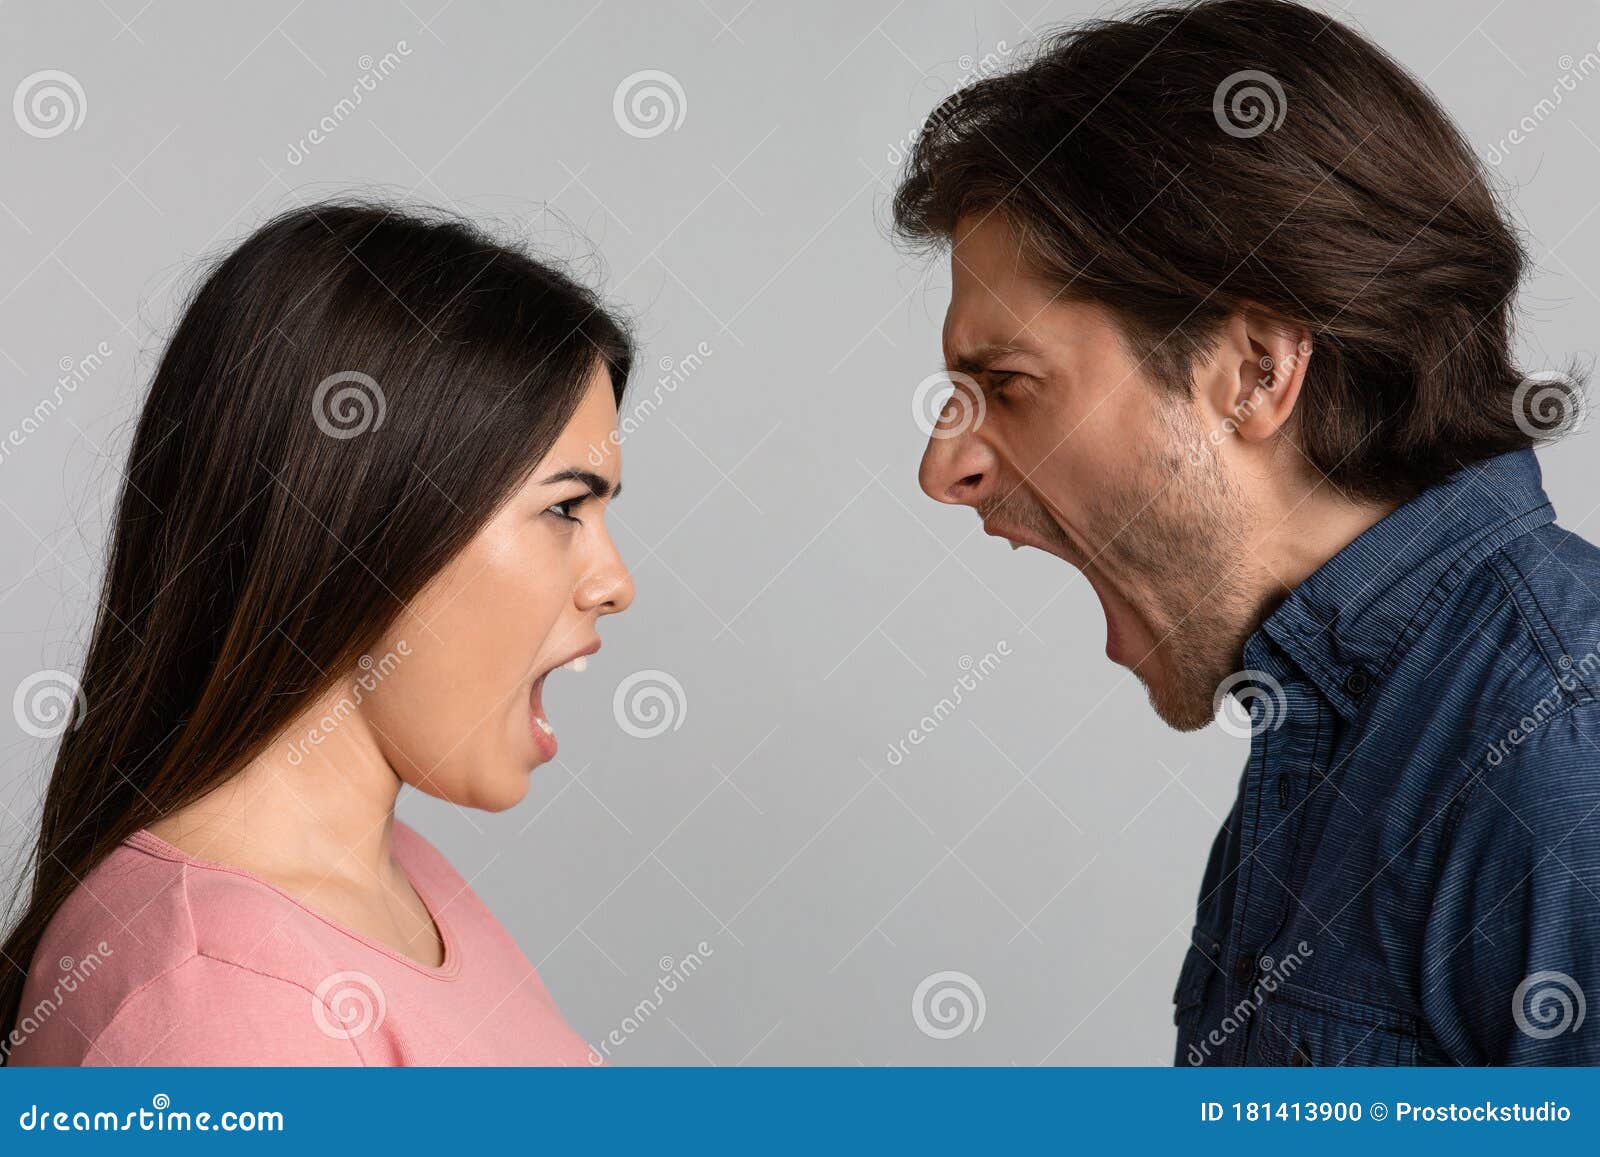 Relationship Crisis Angry Couple Screaming At Each Other Over Light